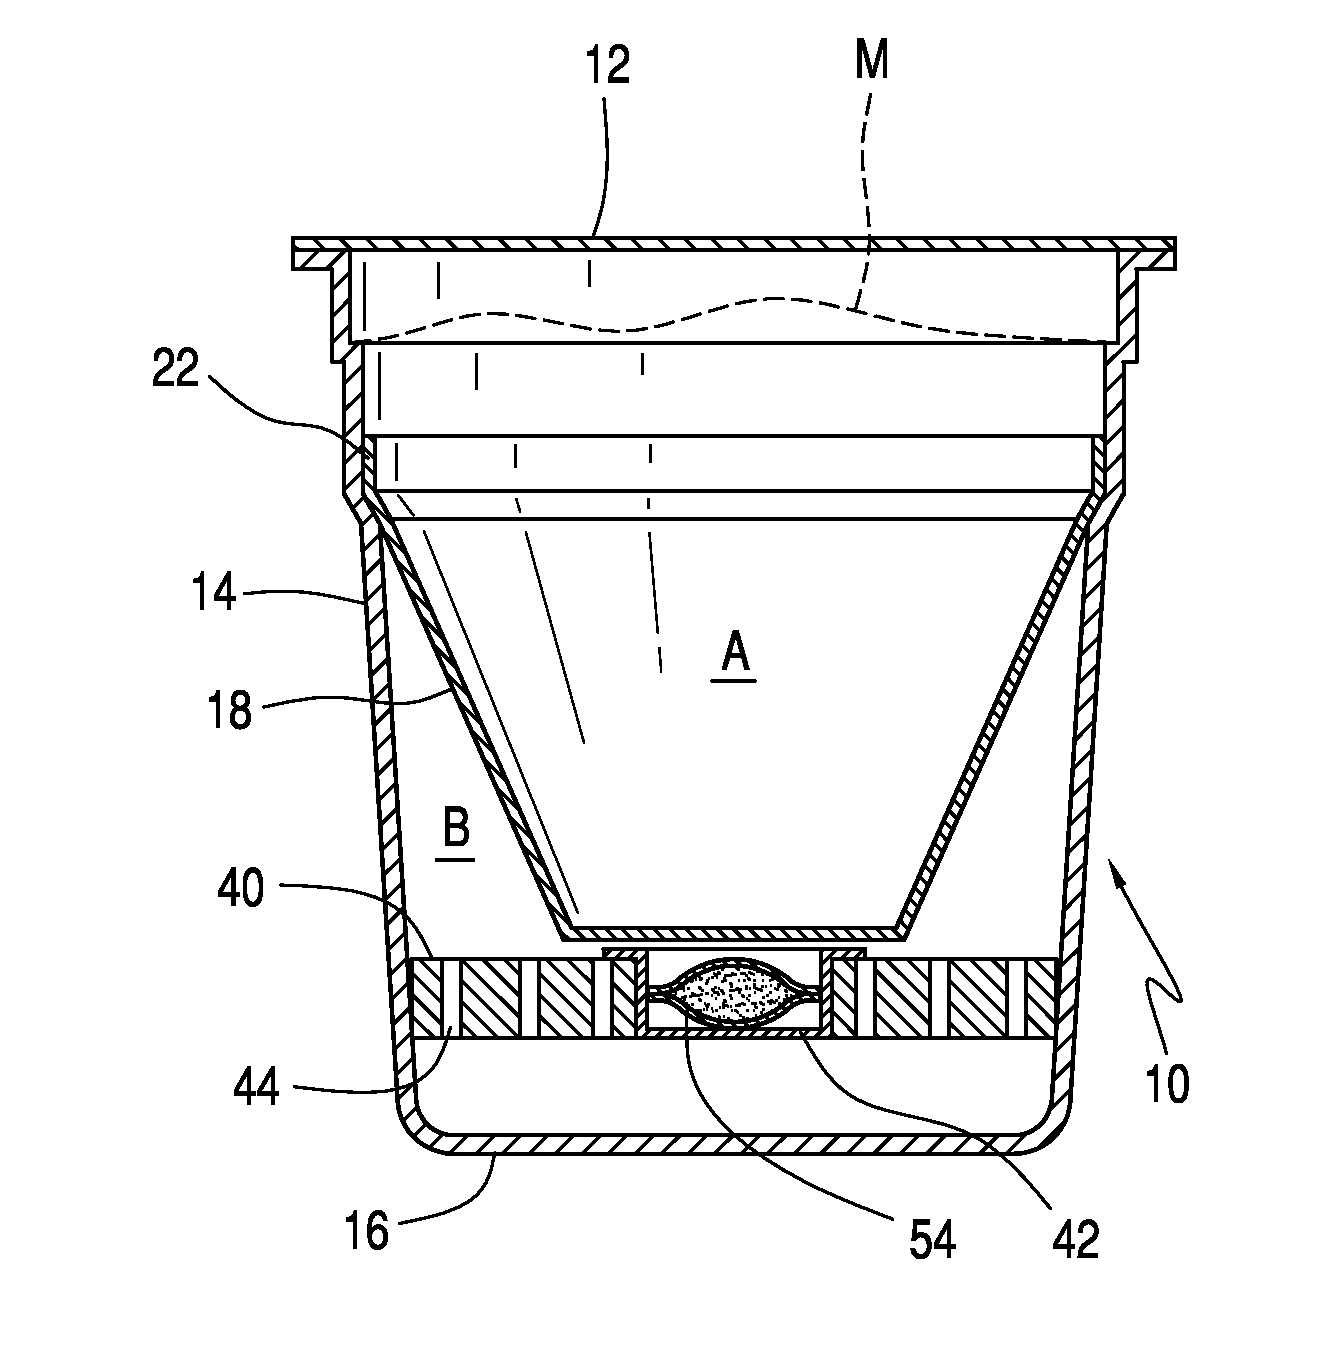 Oxygen and carbon dioxide absorption in a single use container with an absorbent support below the filter